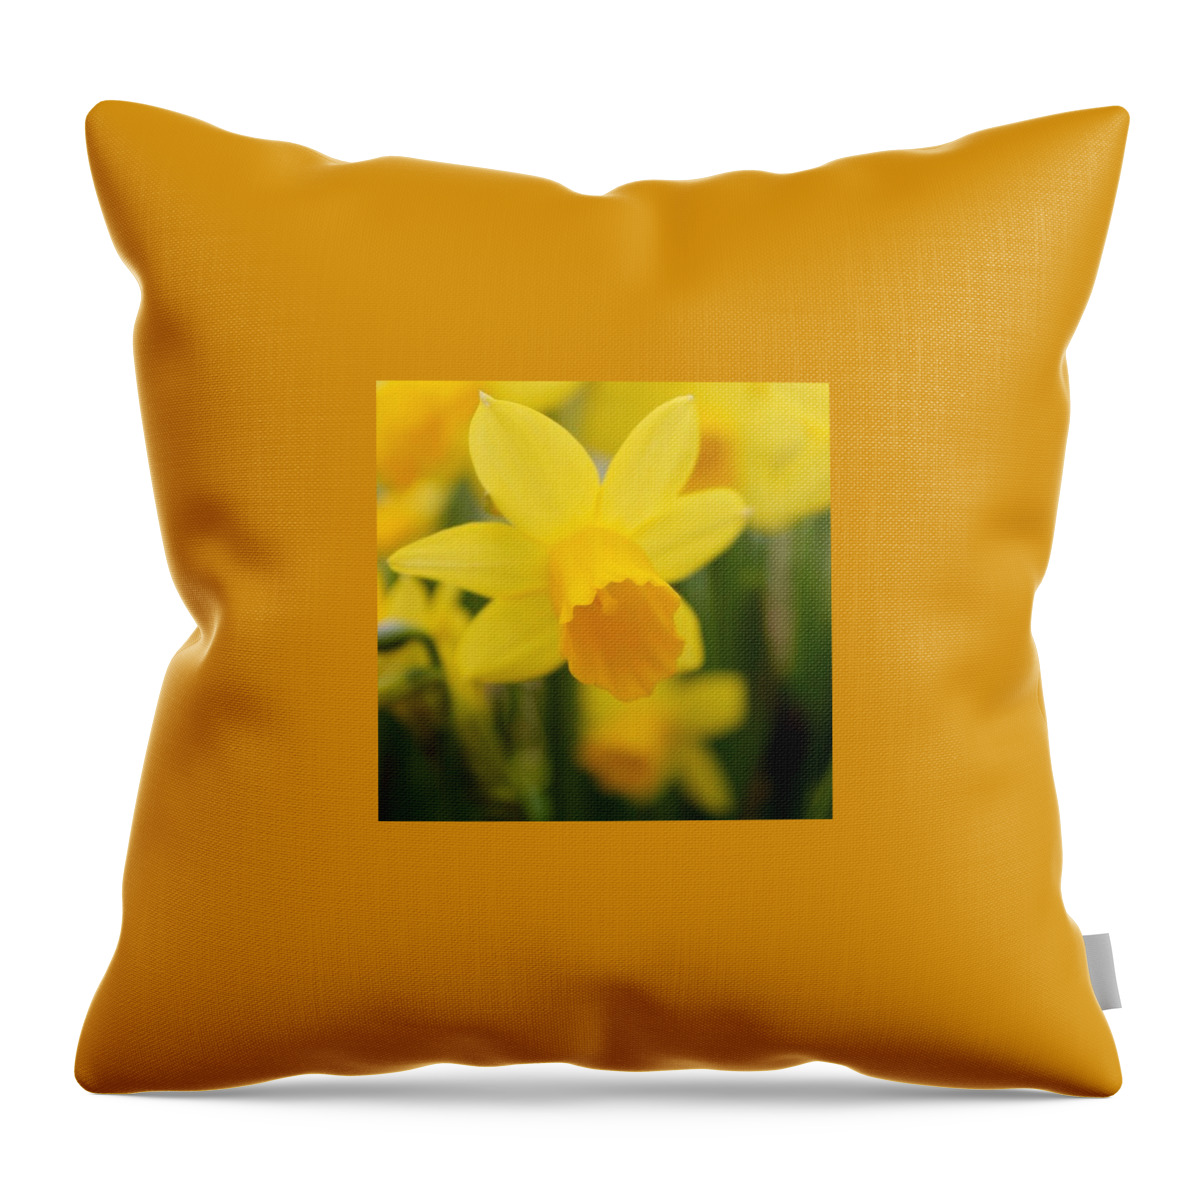 Yellow Throw Pillow featuring the photograph Yellow Bloom by Justin Connor